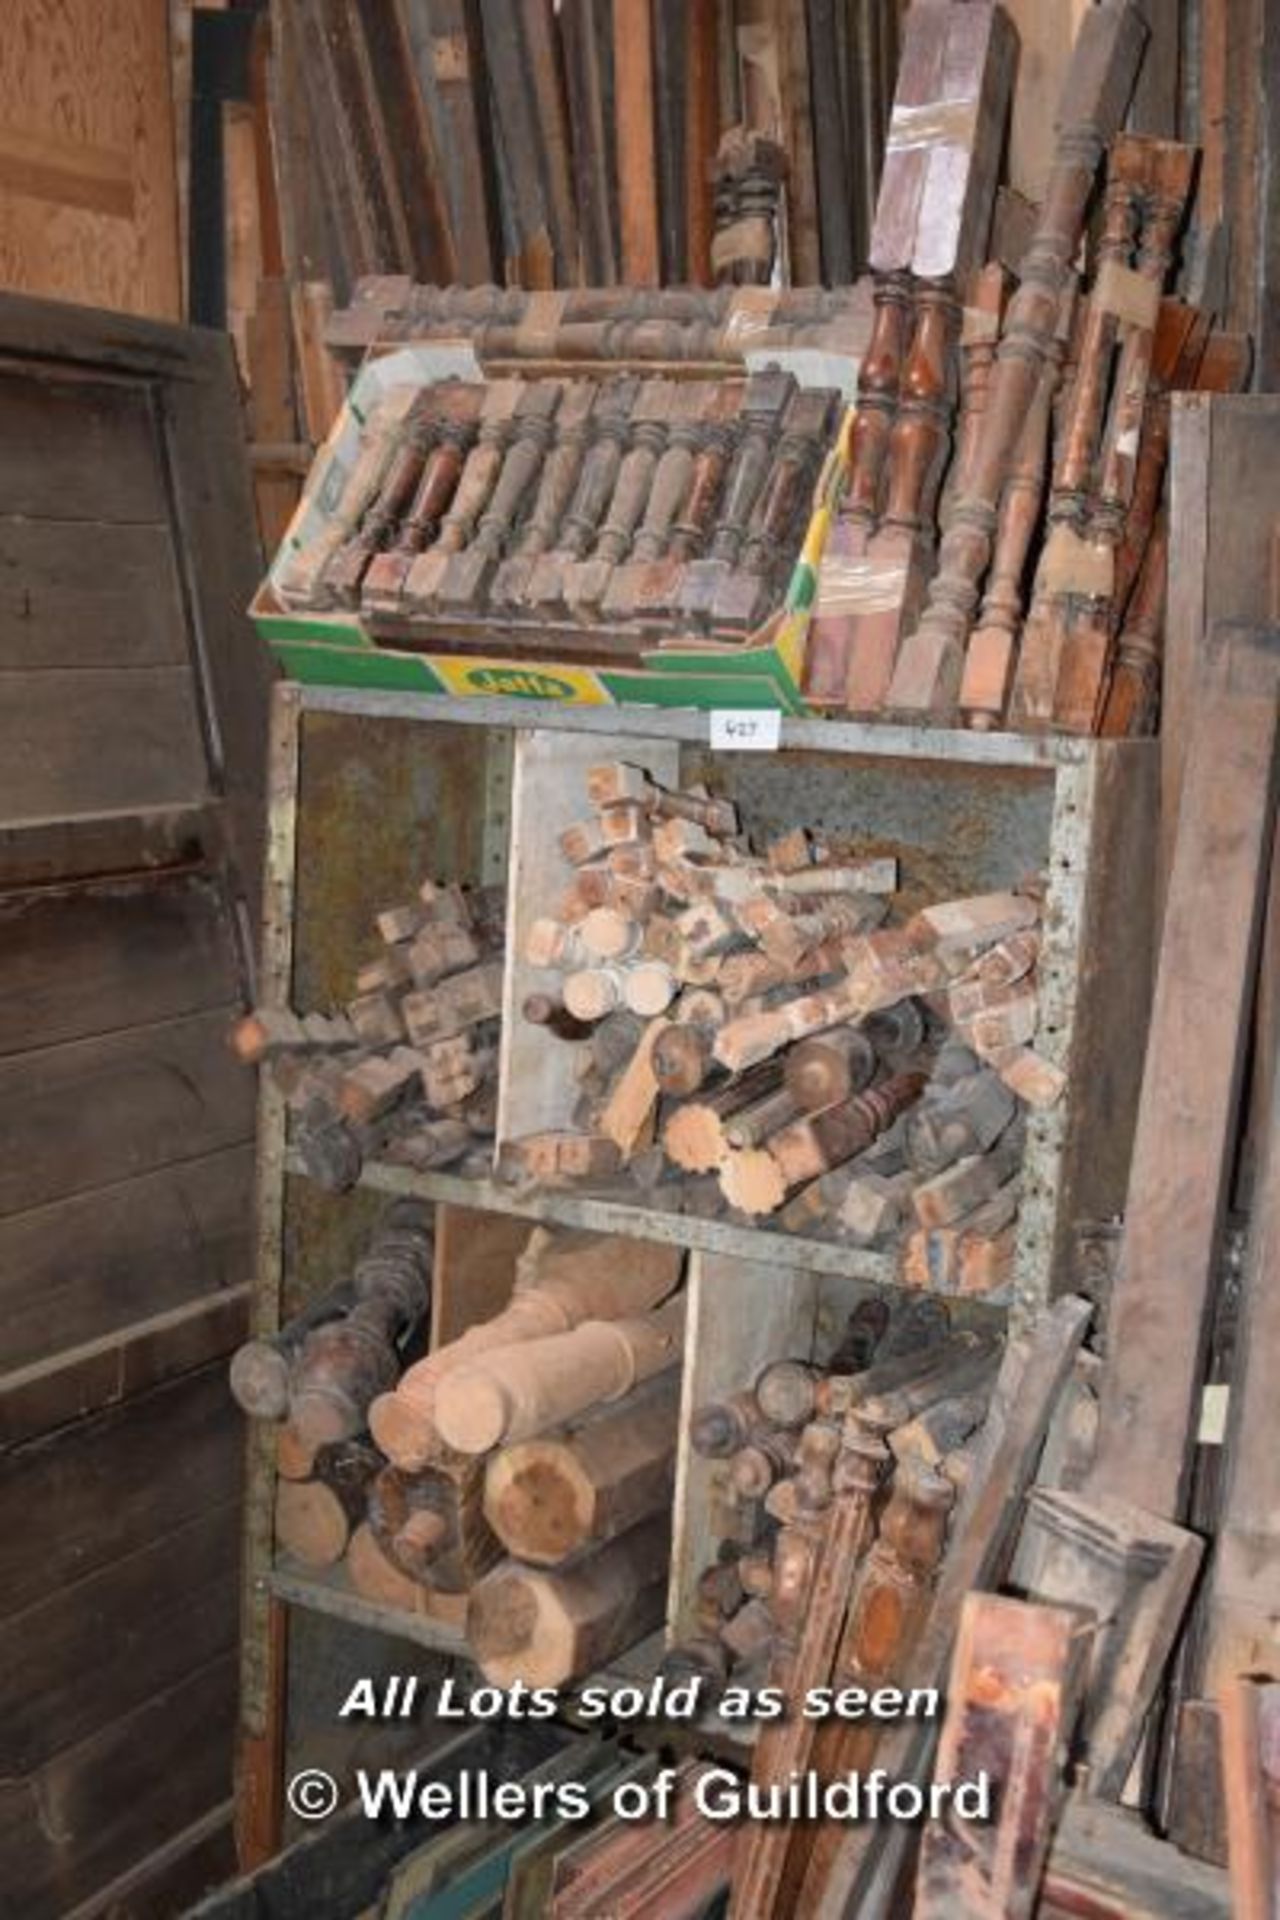 *SHELVING UNIT CONTAINING LARGE QUANTITY OF SPINDLES